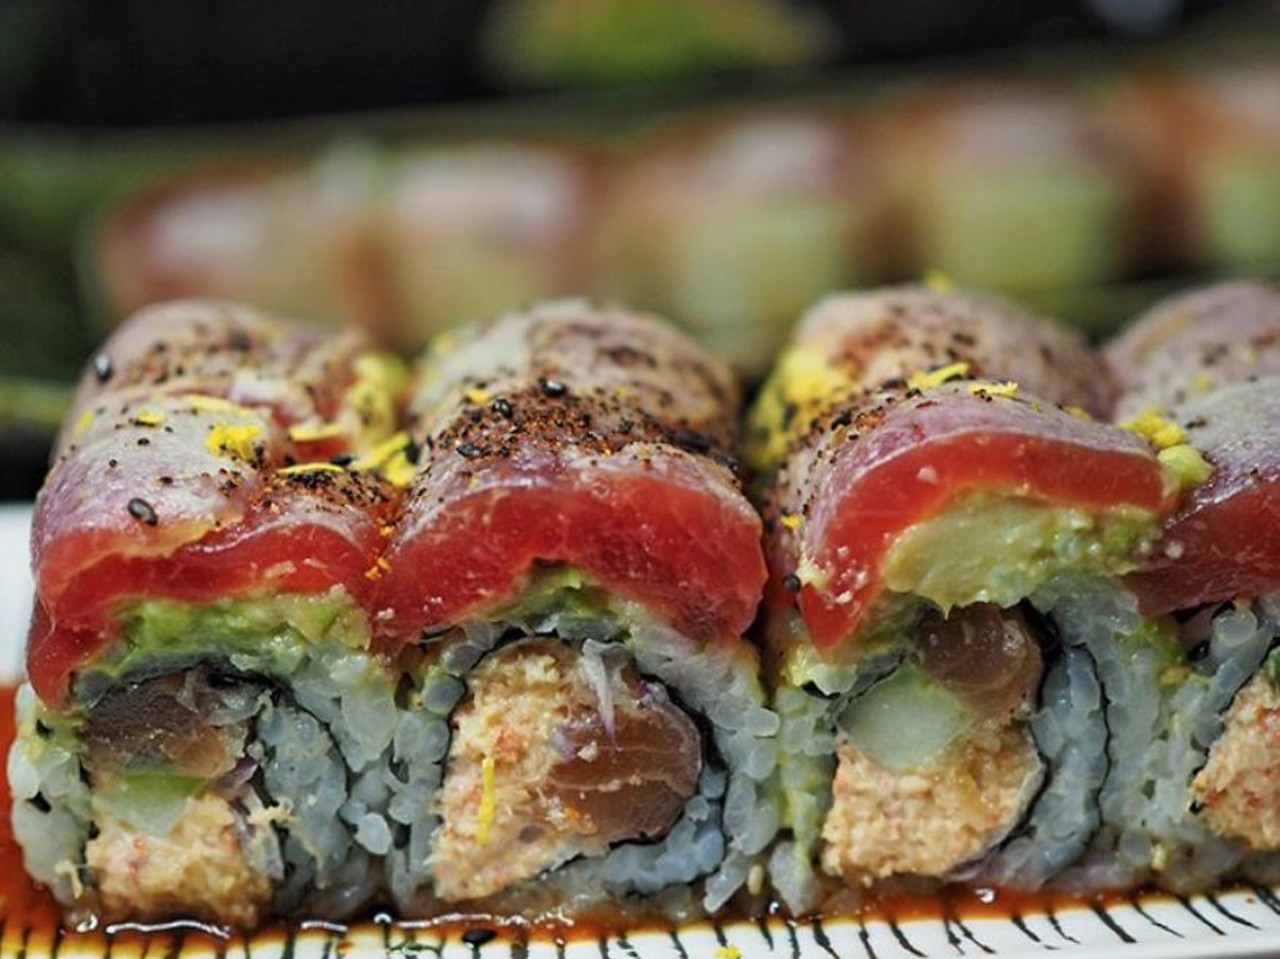 Dragonfly Robata Grill & Sushi
7972 Via Dellagio Way, 407-370-3359 
Weep over a lack of sushi no further because everyday starting at 5 p.m. and ending at 7 p.m., Dragonfly Robata offers a $3 to $7 menu that brings crunch rolls, grilled skewers and a create your own sushi option into the mix. The steamed buns with their braised rib interiors are also beyond worth taking a swing at. 
Photo via goepicurista/Instagram